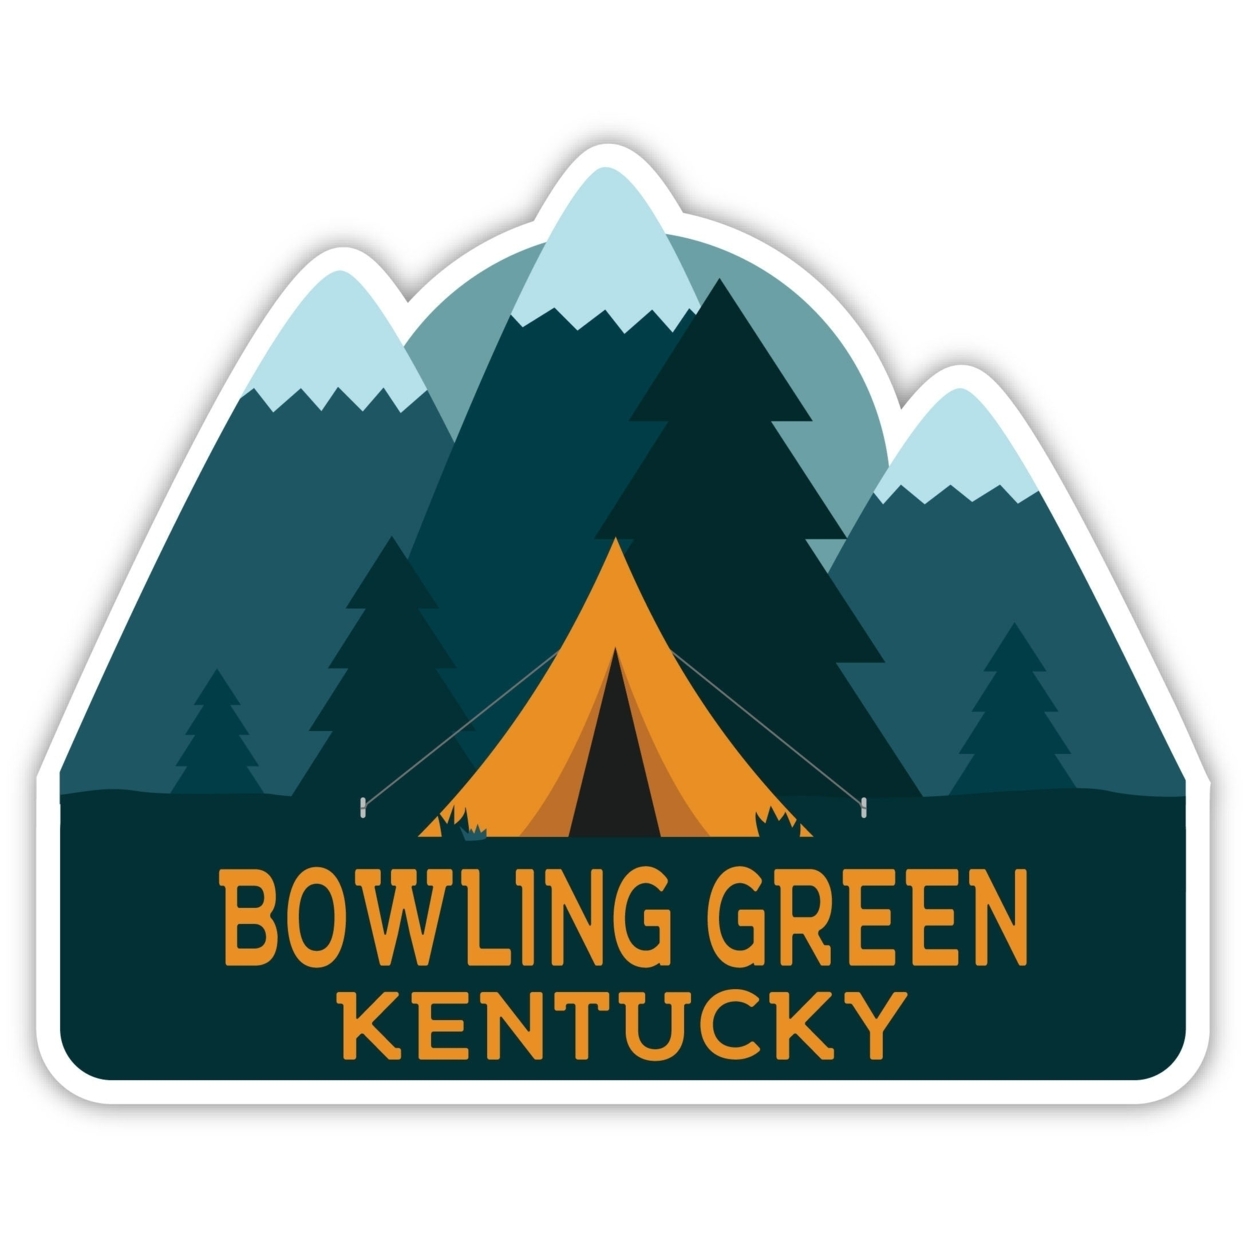 Bowling Green Kentucky Souvenir Decorative Stickers (Choose Theme And Size) - Single Unit, 6-Inch, Tent